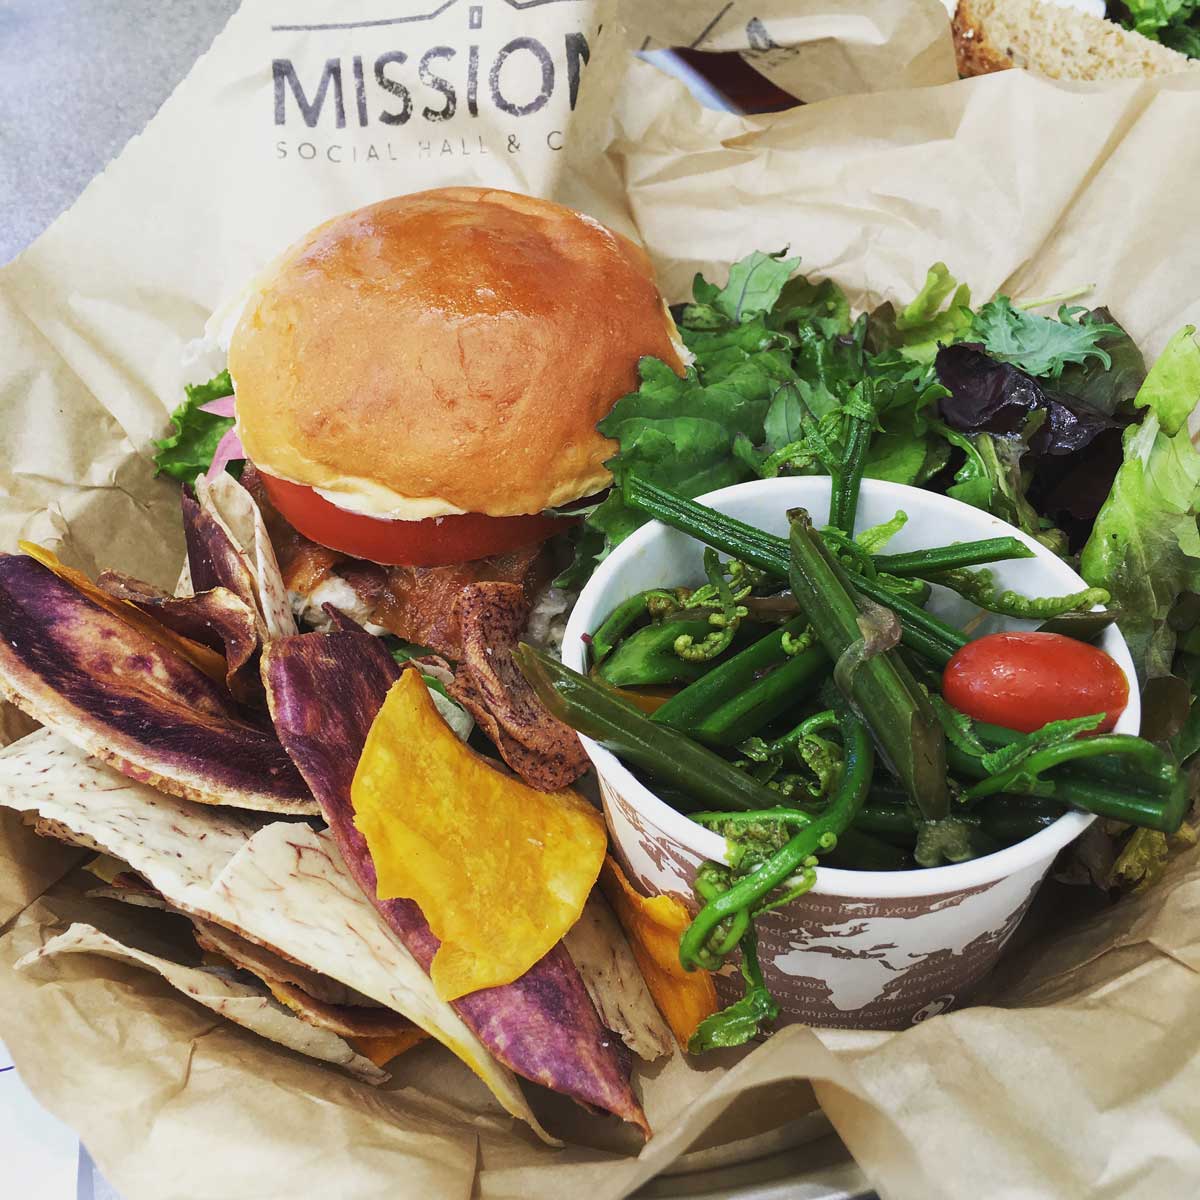 Daily Catch BLT Set with Taro Chips, Salad and One Side at Mission Social Hall & Cafe / Celia Sin-Tien Cheng